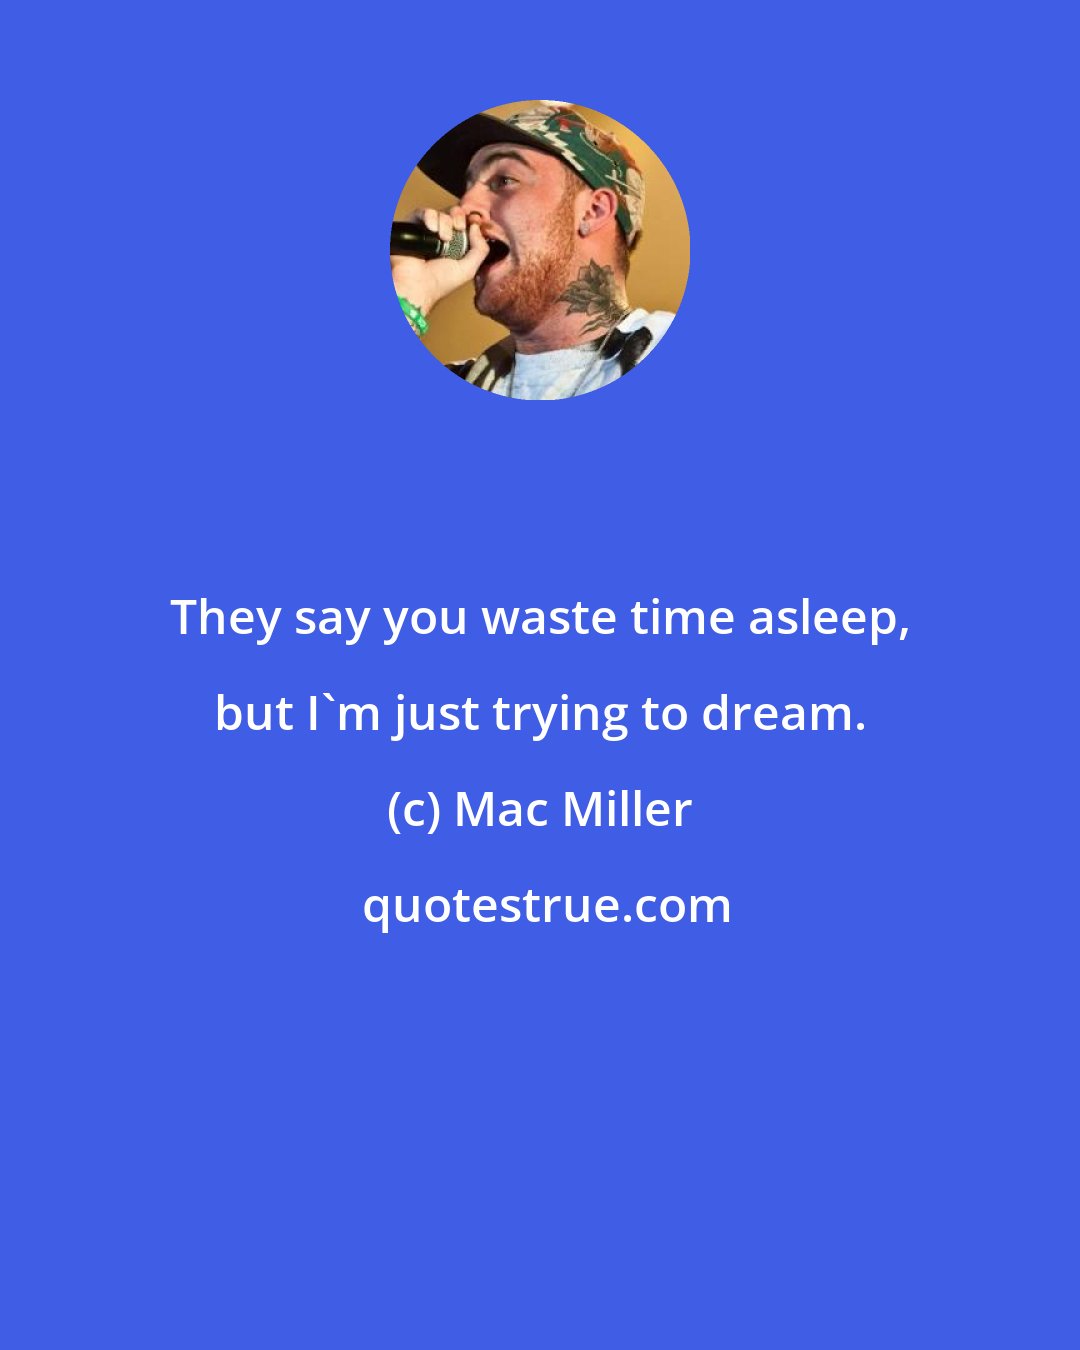 Mac Miller: They say you waste time asleep, but I'm just trying to dream.